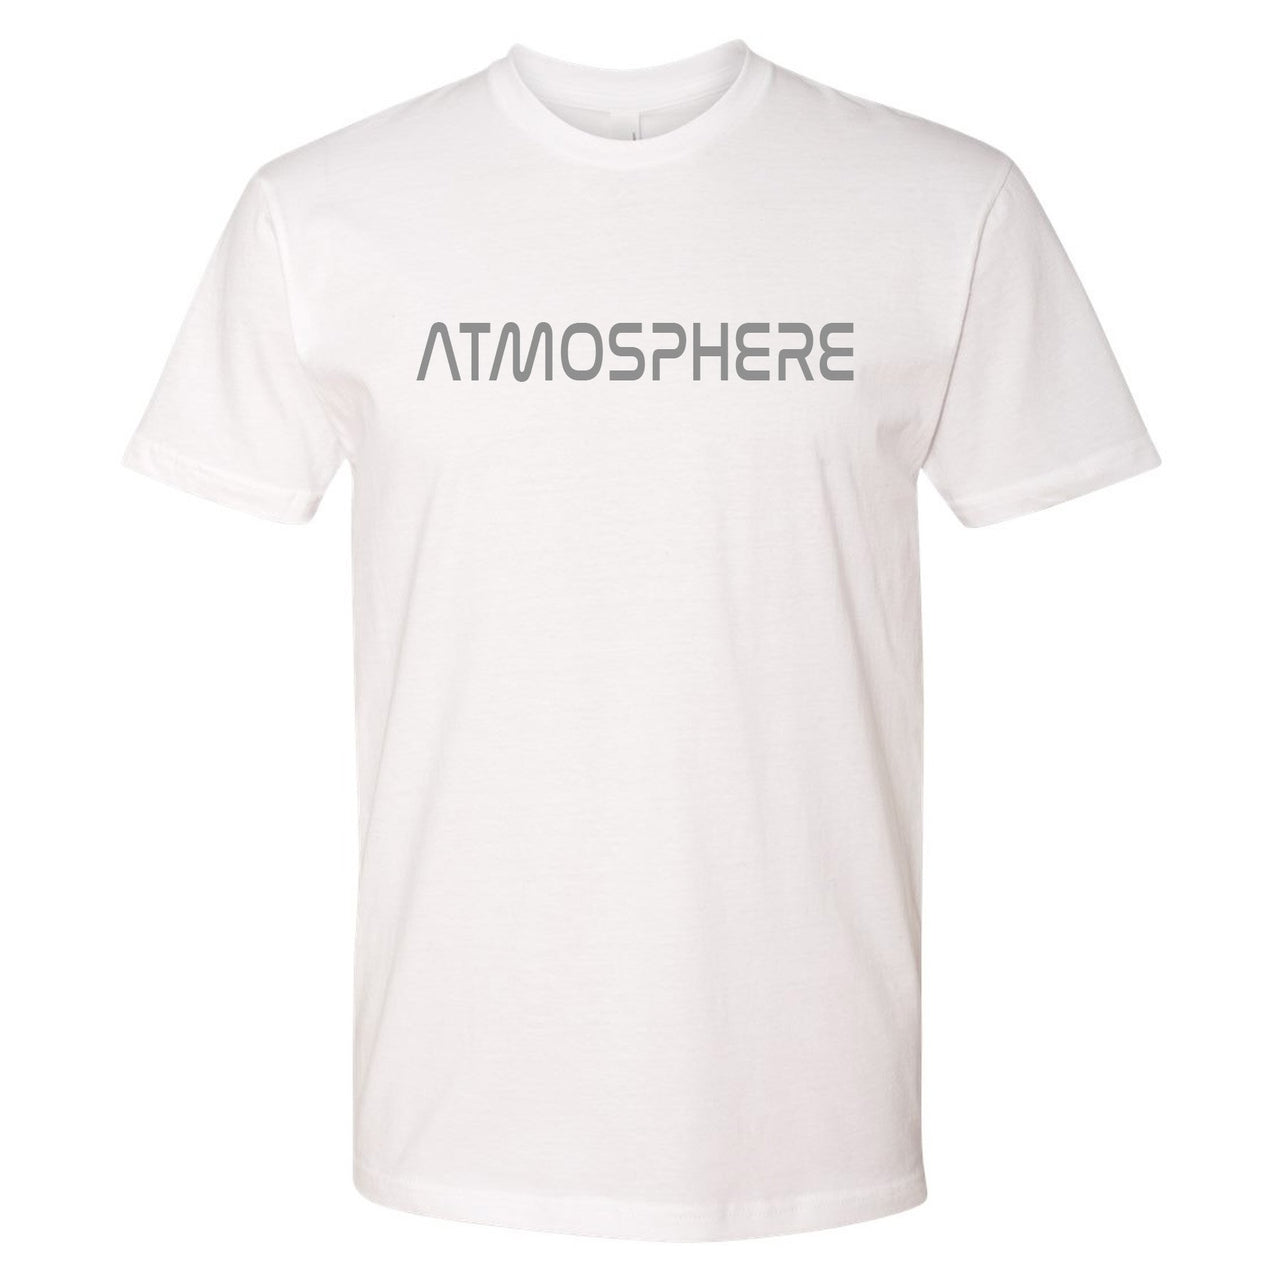 Atmosphere Grey 13s T Shirt | Atmosphere, White